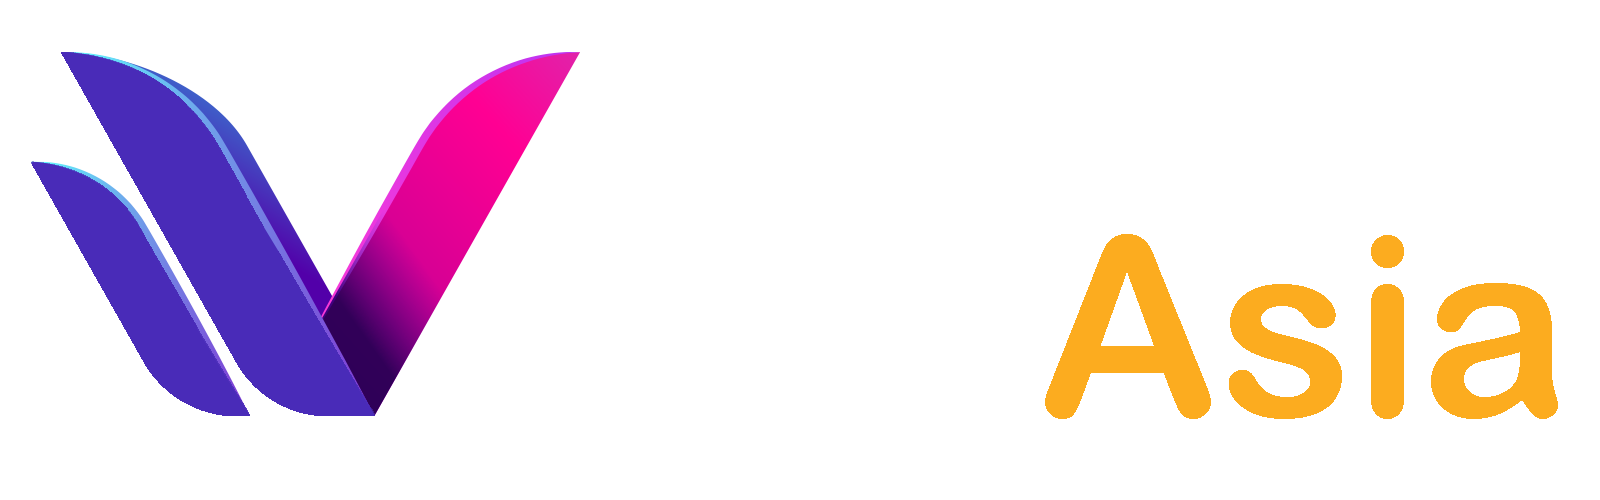 VRA ASIA | Play to Earn